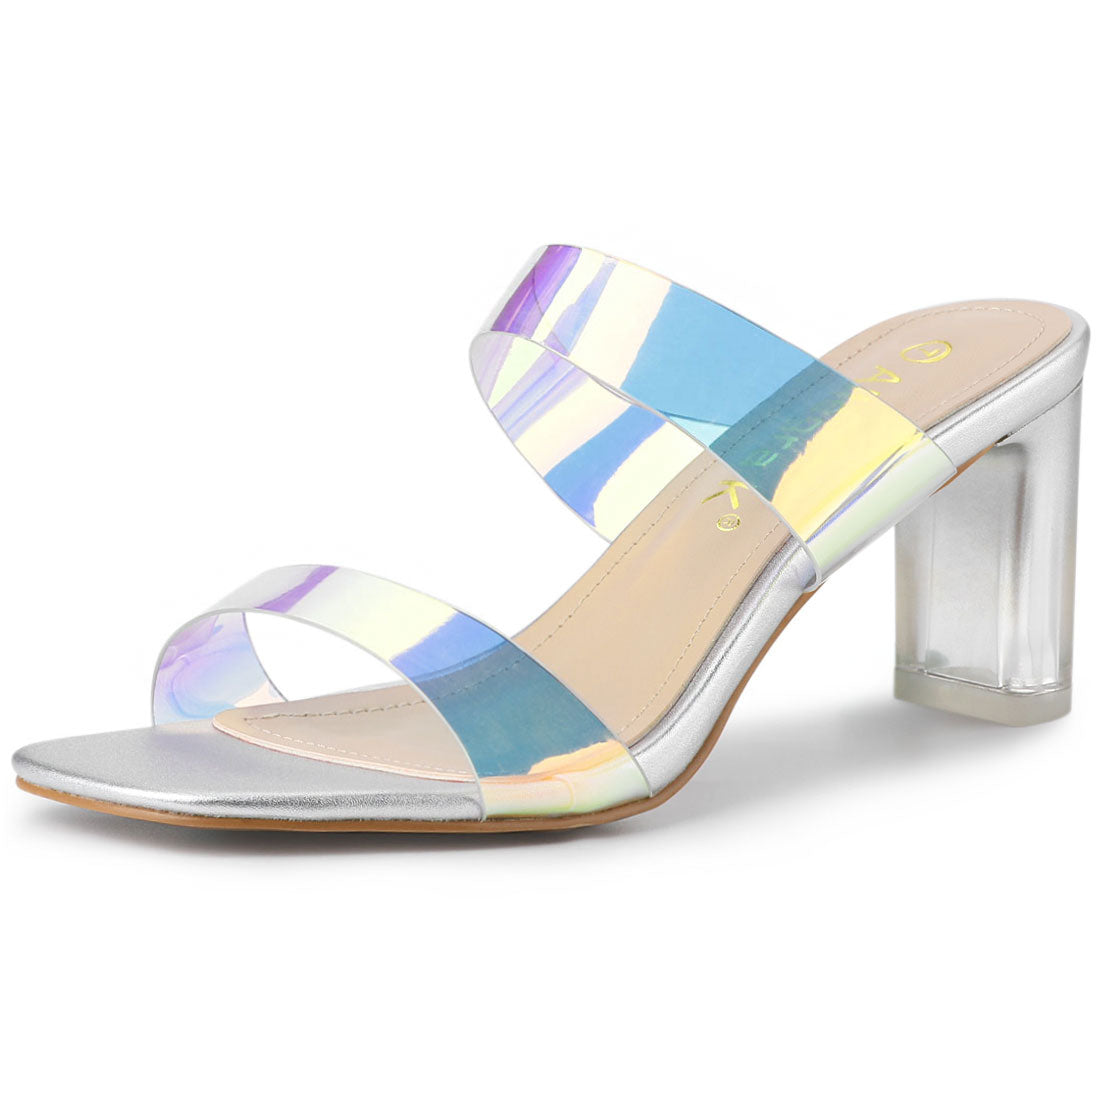 Allegra K Summer Colorful Straps Open Toe Clear Chunky Heel Sandals